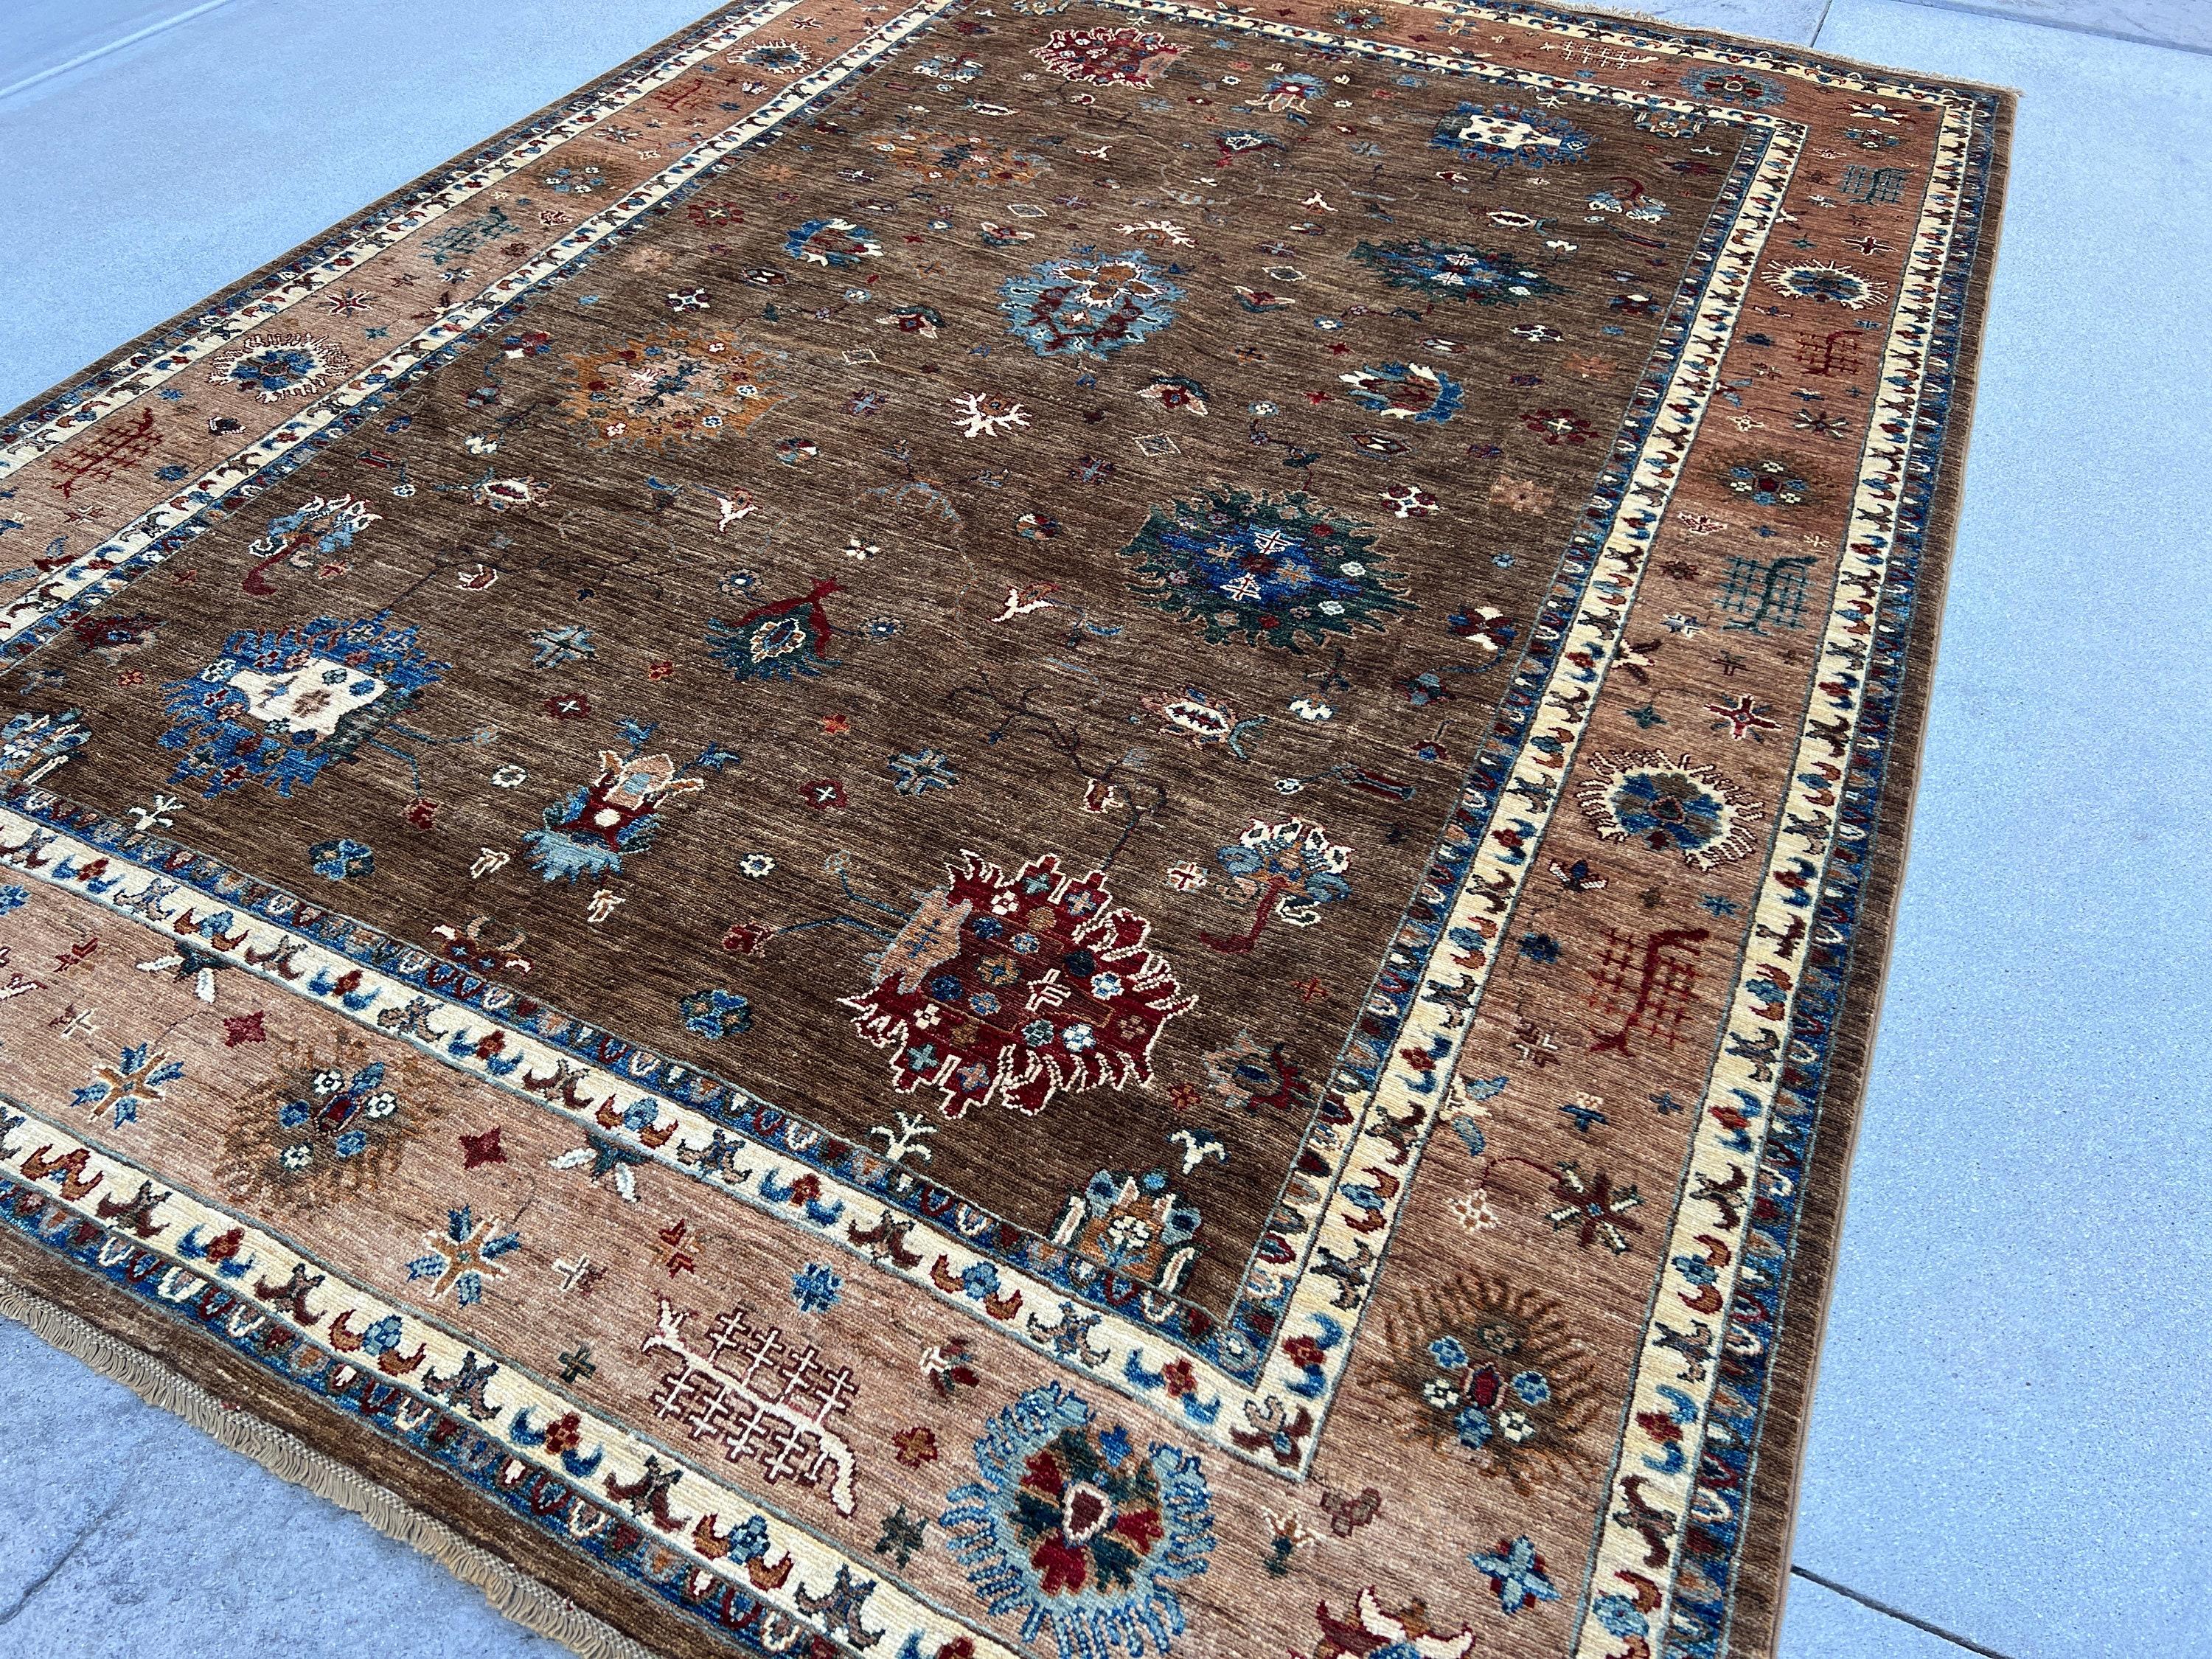 7x10 Hand-Knotted Afghan Rug Premium Hand-Spun Afghan Wool Fair Trade In New Condition For Sale In San Marcos, CA